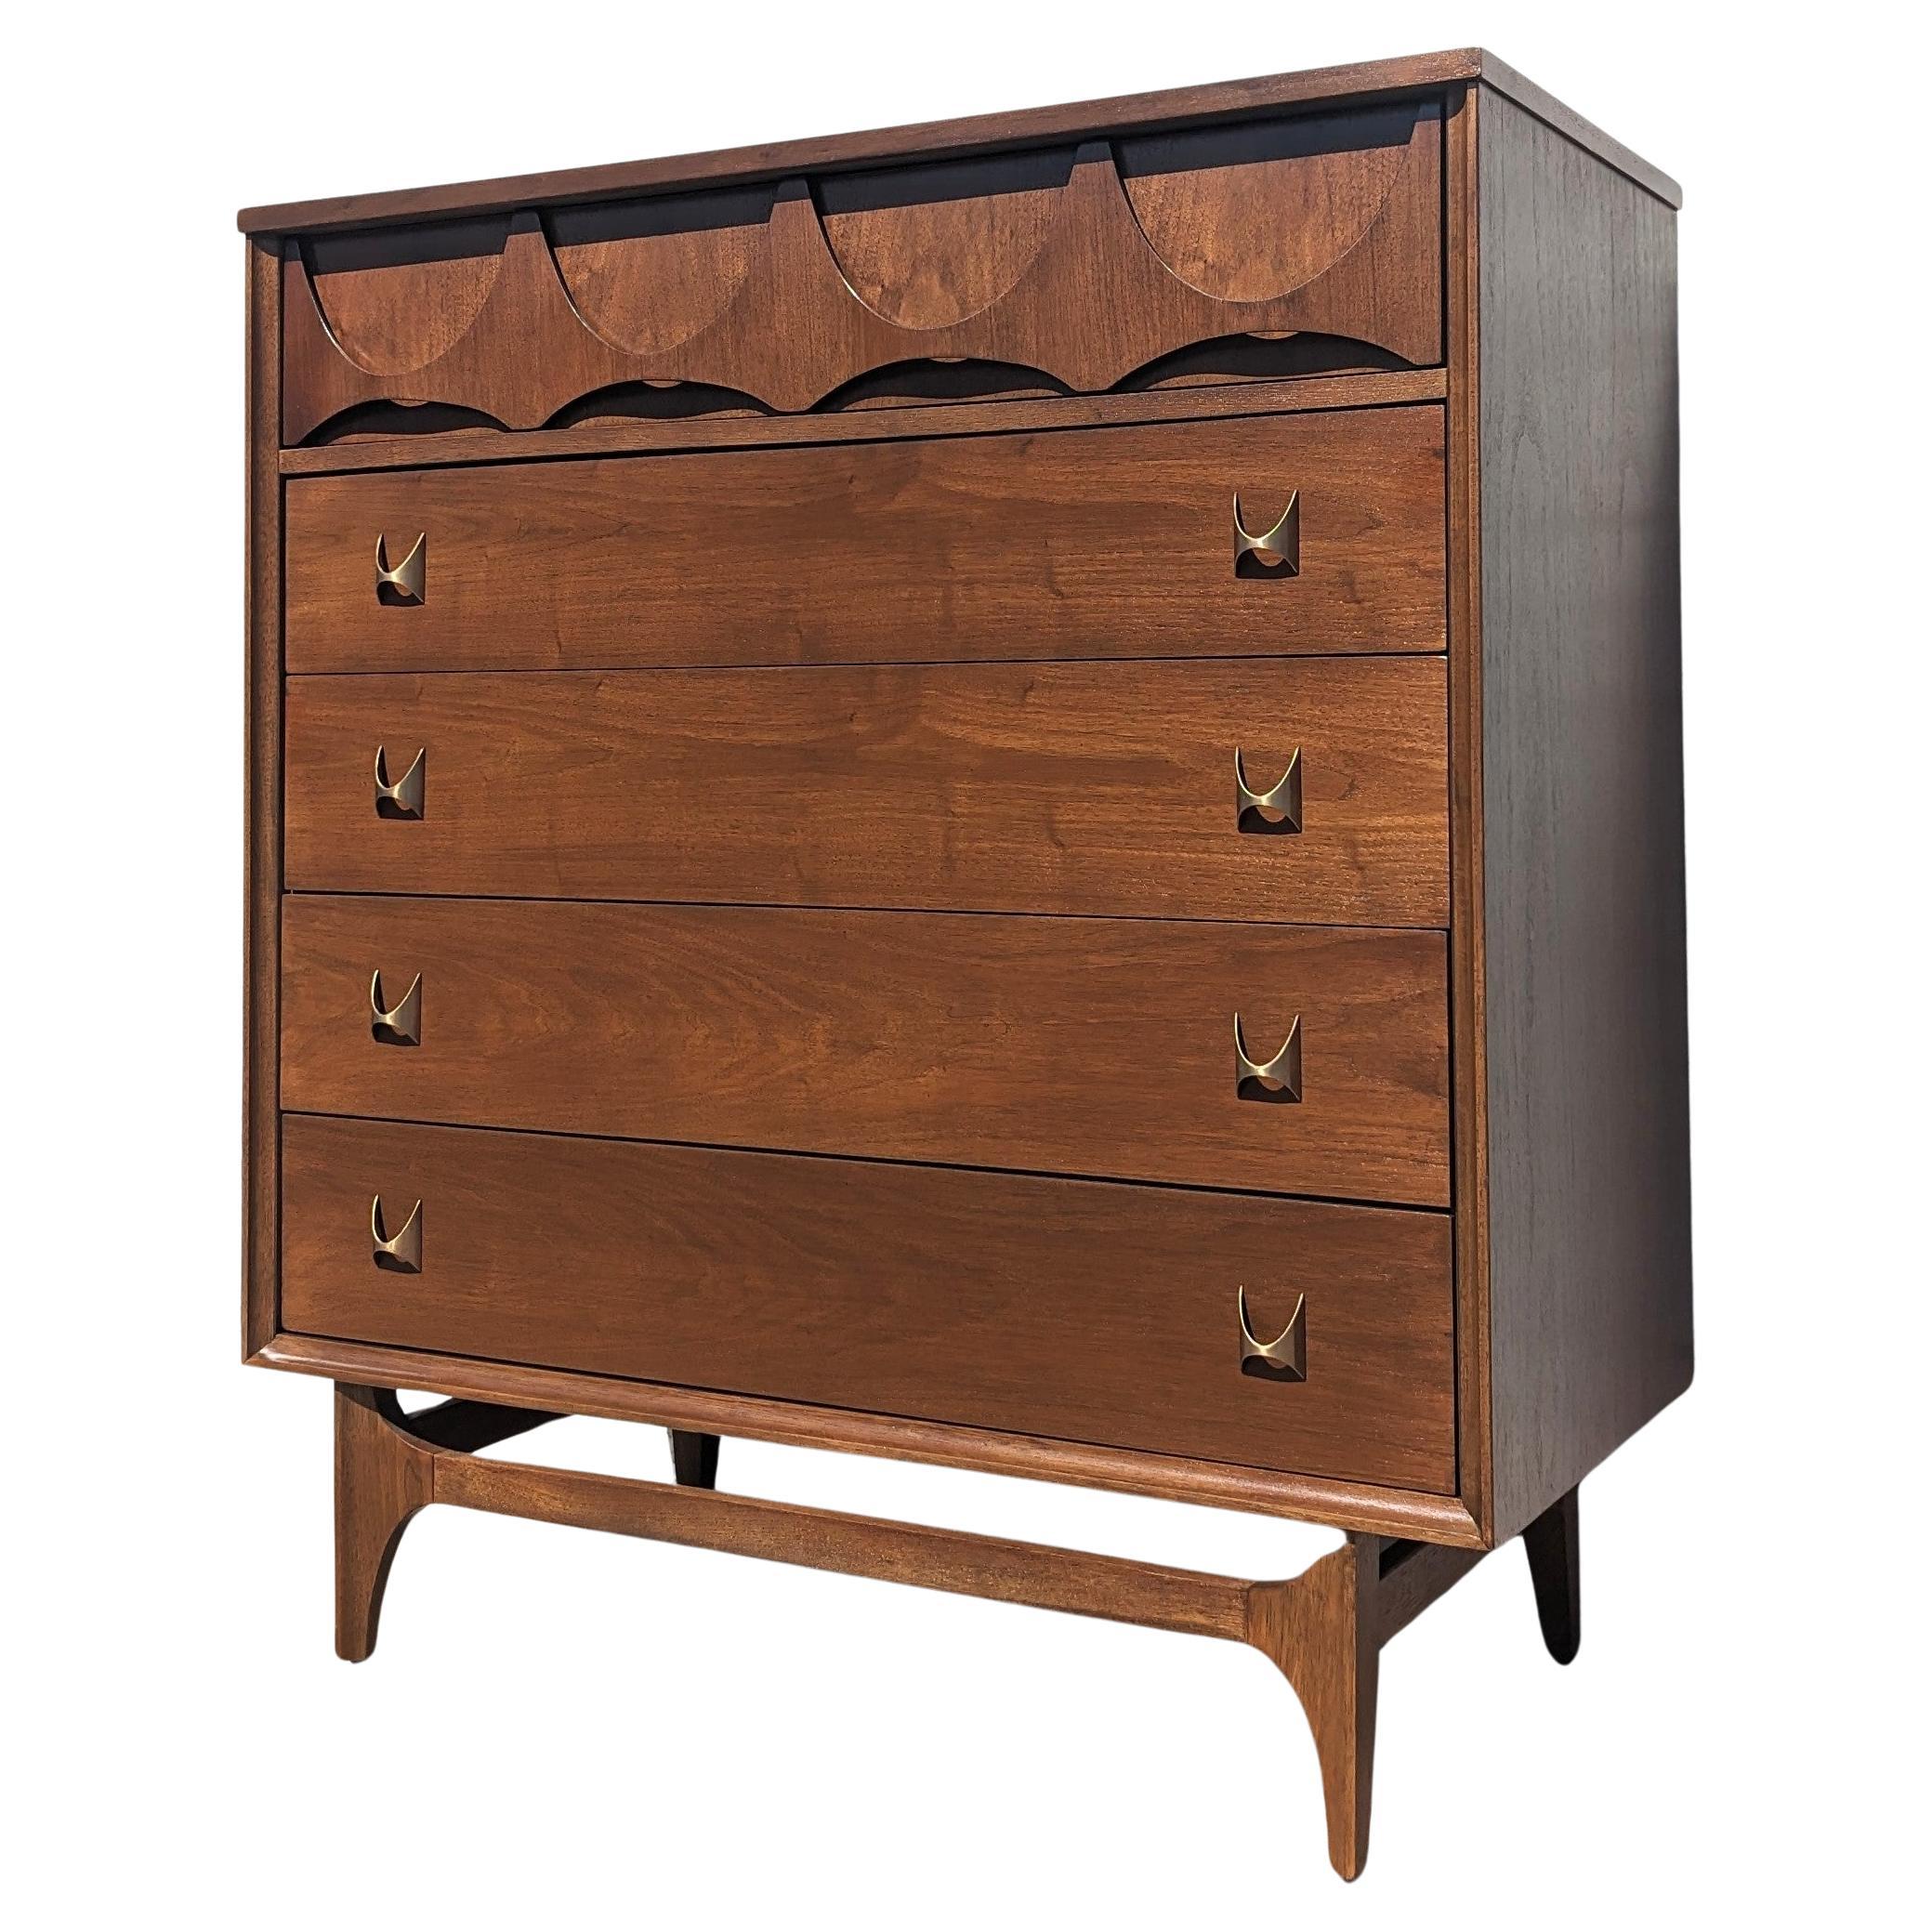 What is a short wide dresser called?